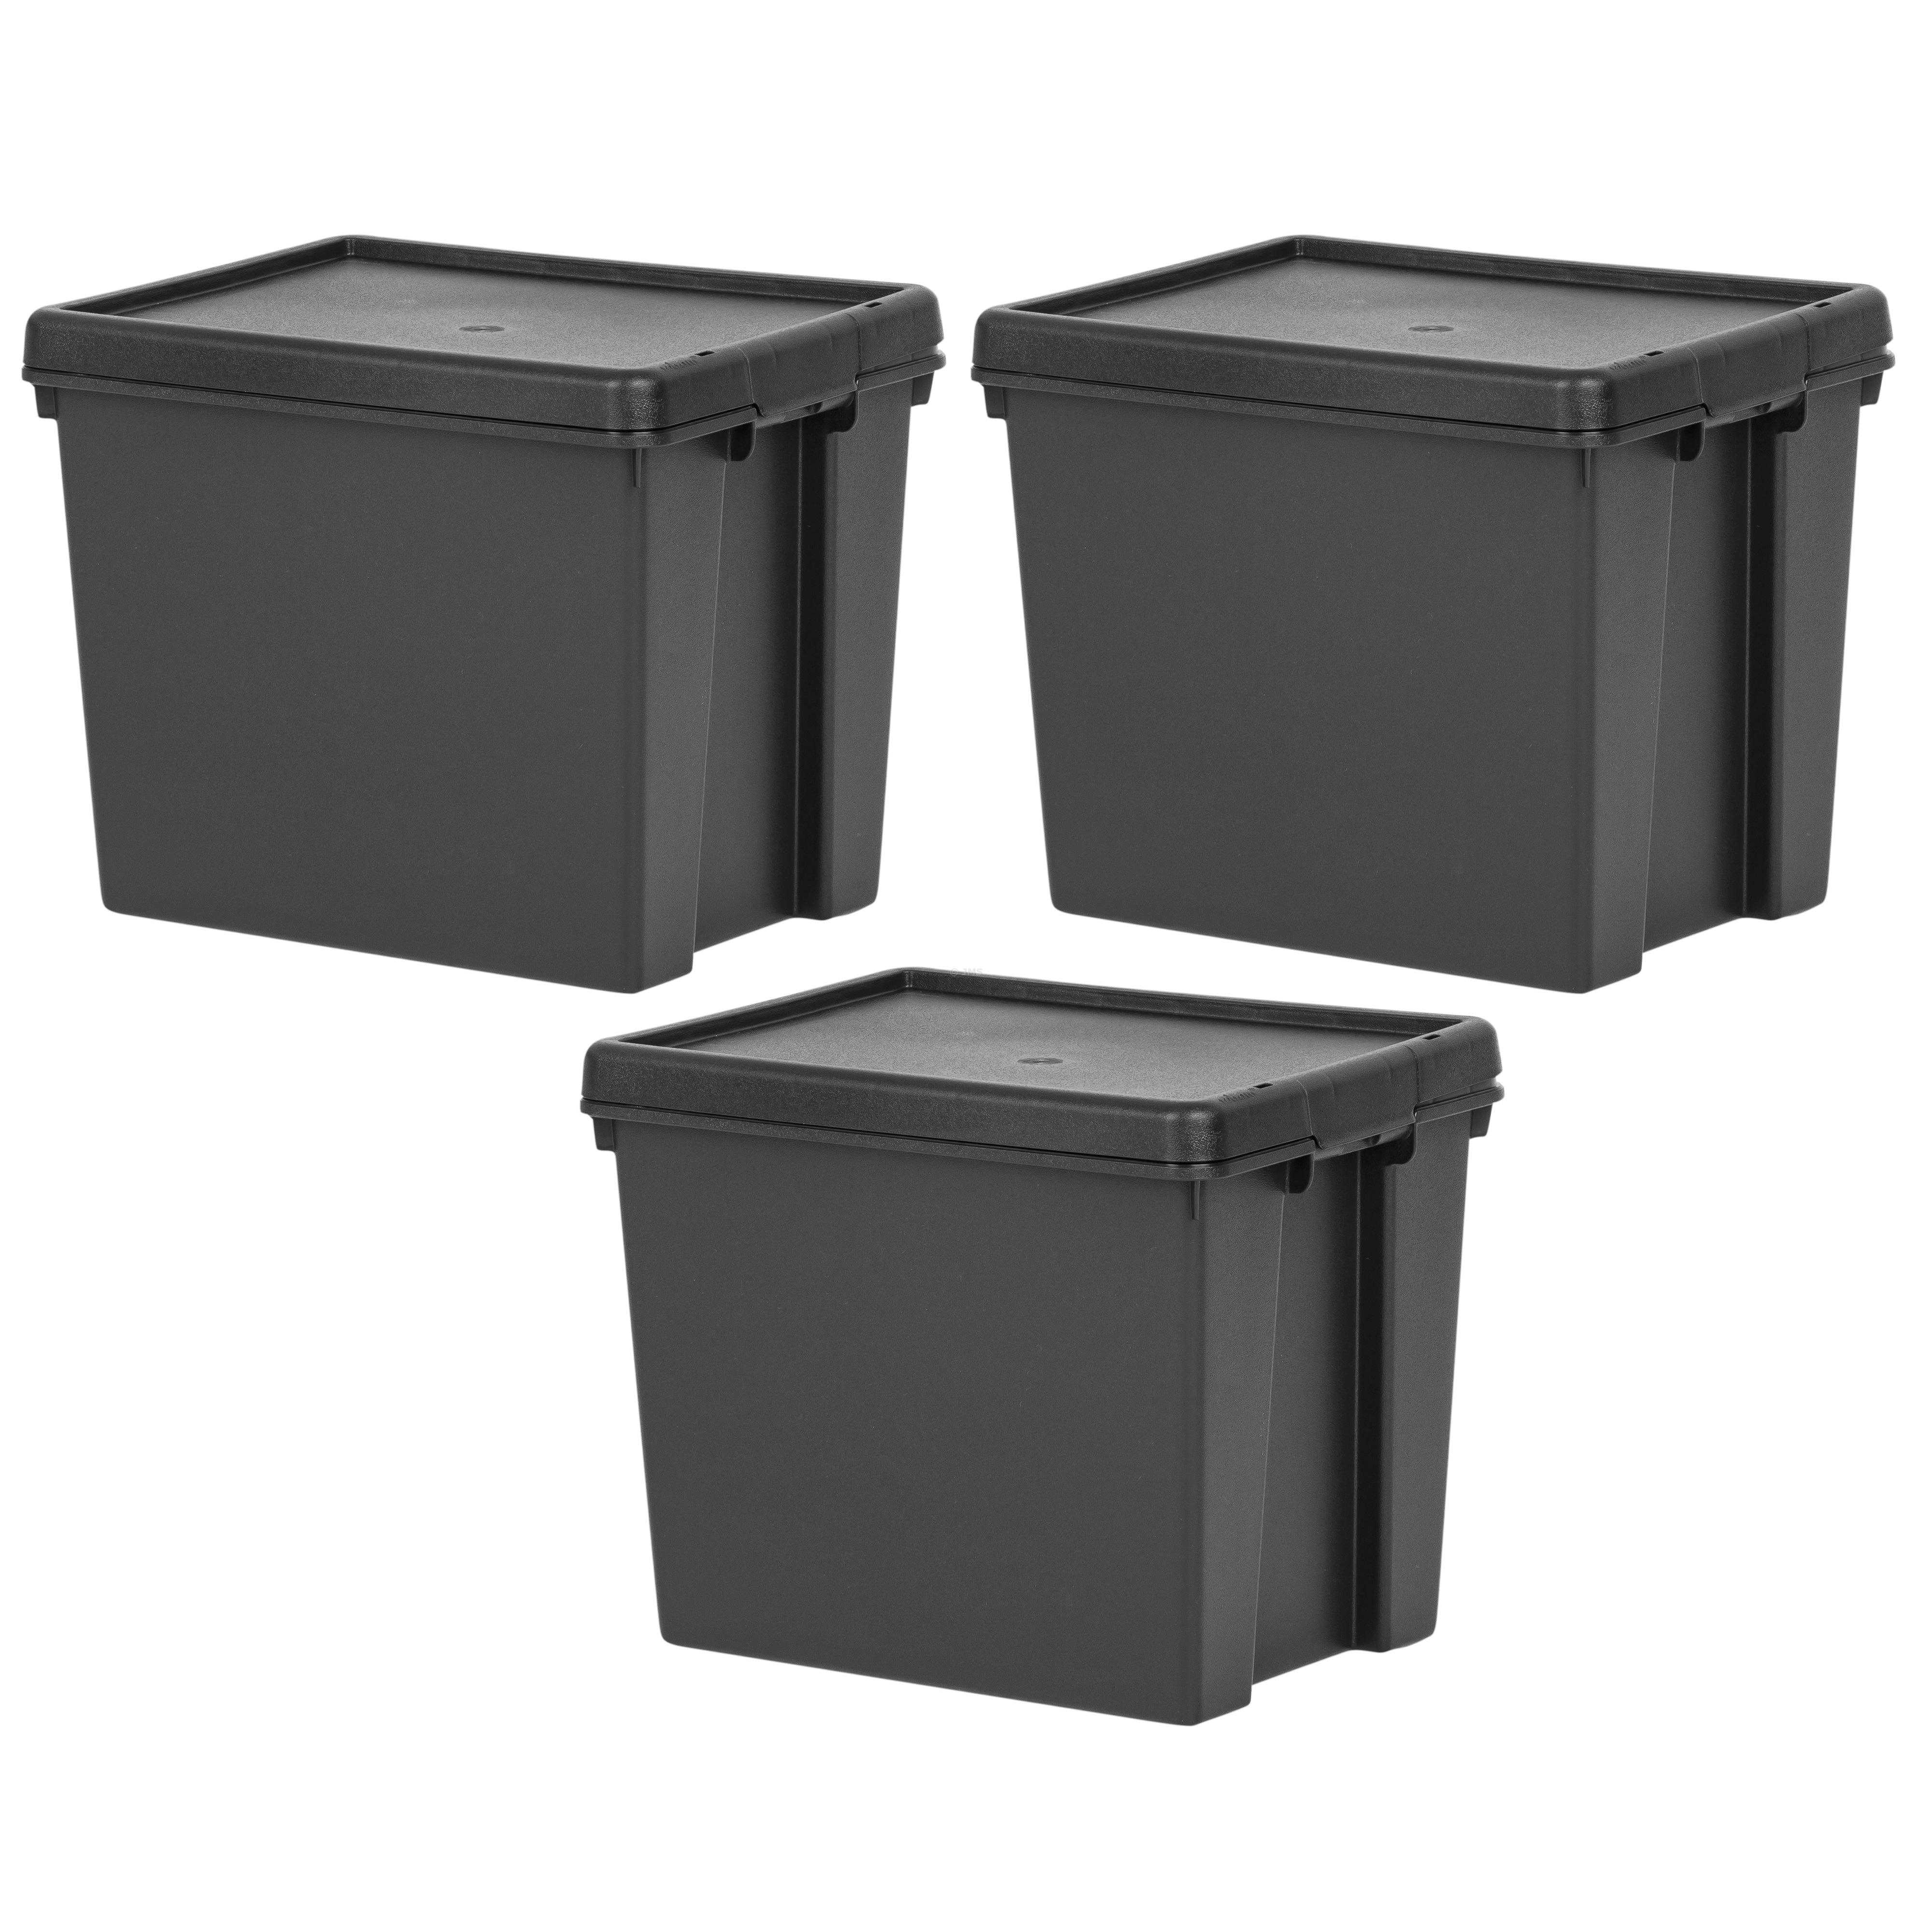 3 x Plastic 24L Black Storage Box with Lid Heavy Duty Recycled Stackable Nestable Containers Home Office Garage Toolbox